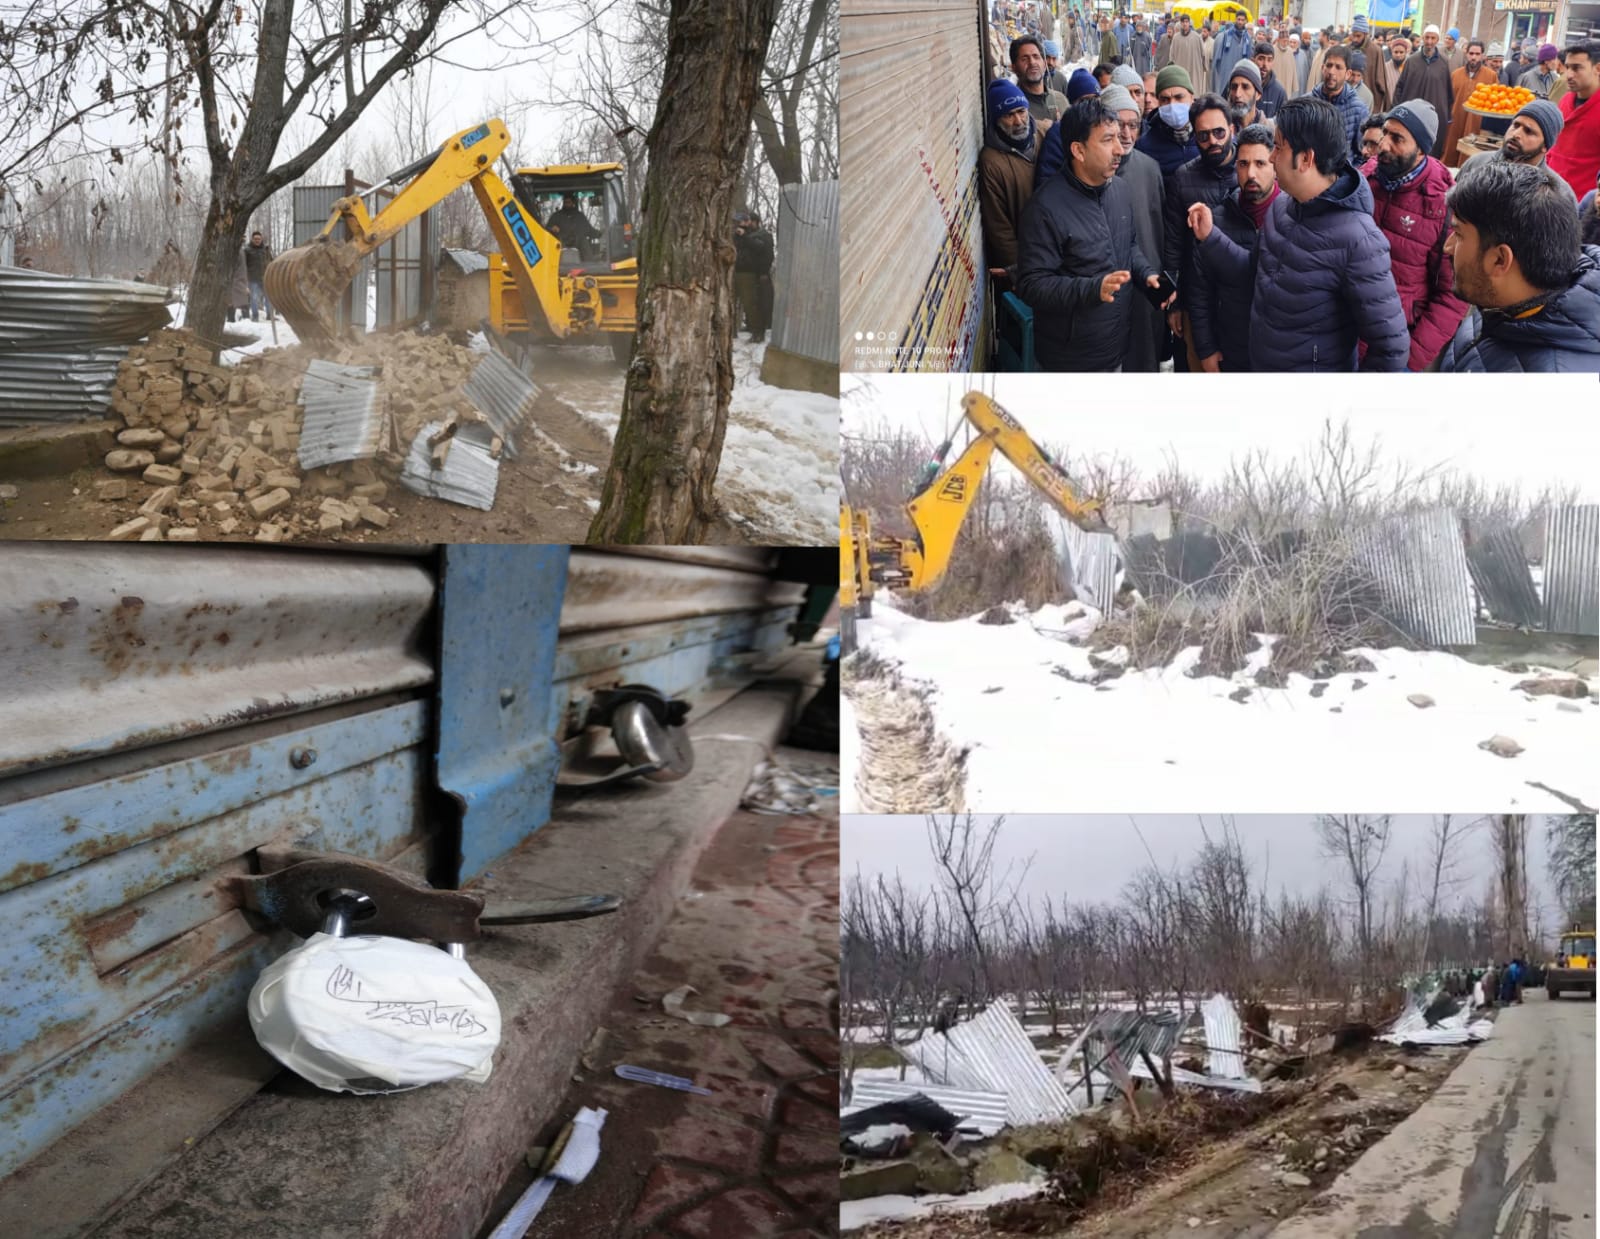 406 Kanals of State/ Kahcharie land retrieved at Shopian, 40 shops sealed in Main Town